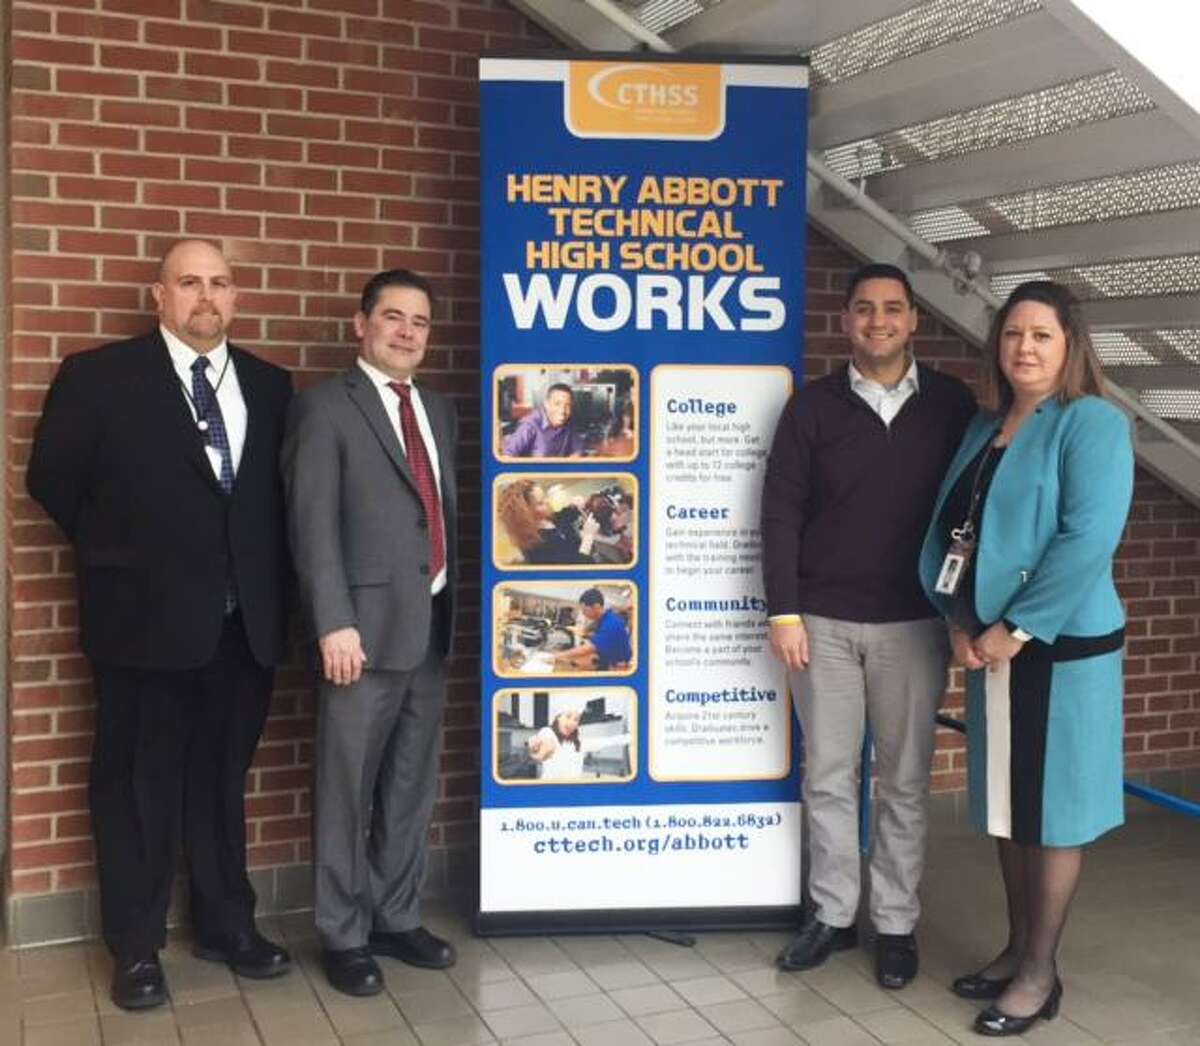 State Reps. Michael Ferguson, R-Danbury, and Will Duff, R-Bethel, visited Henry Abbott Technical High School last week to learn about the school’s programs and promote bills that support manufacturing jobs.